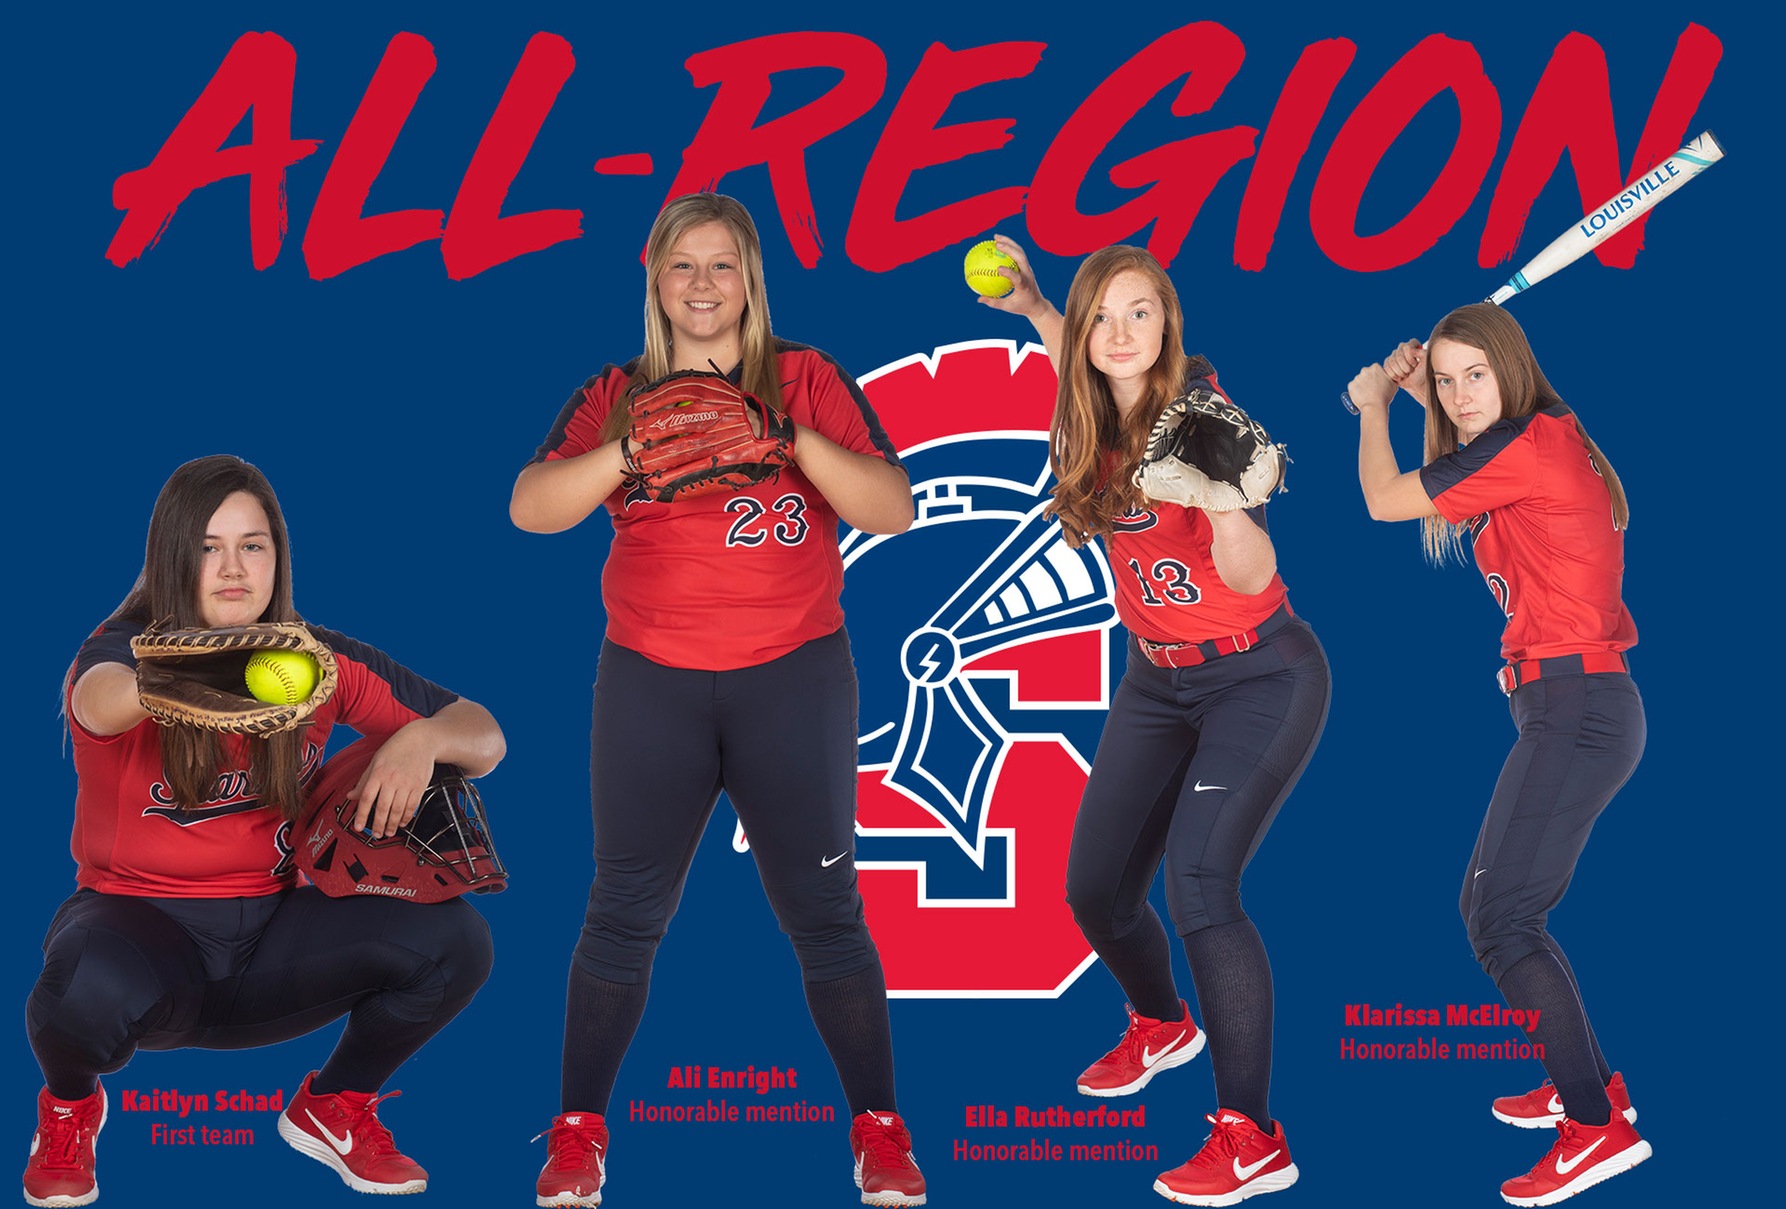 Southwestern's Kaitlyn Schad, Ali Enright, Ella Rutherford and Klarissa McElroy all earned all-region honors.